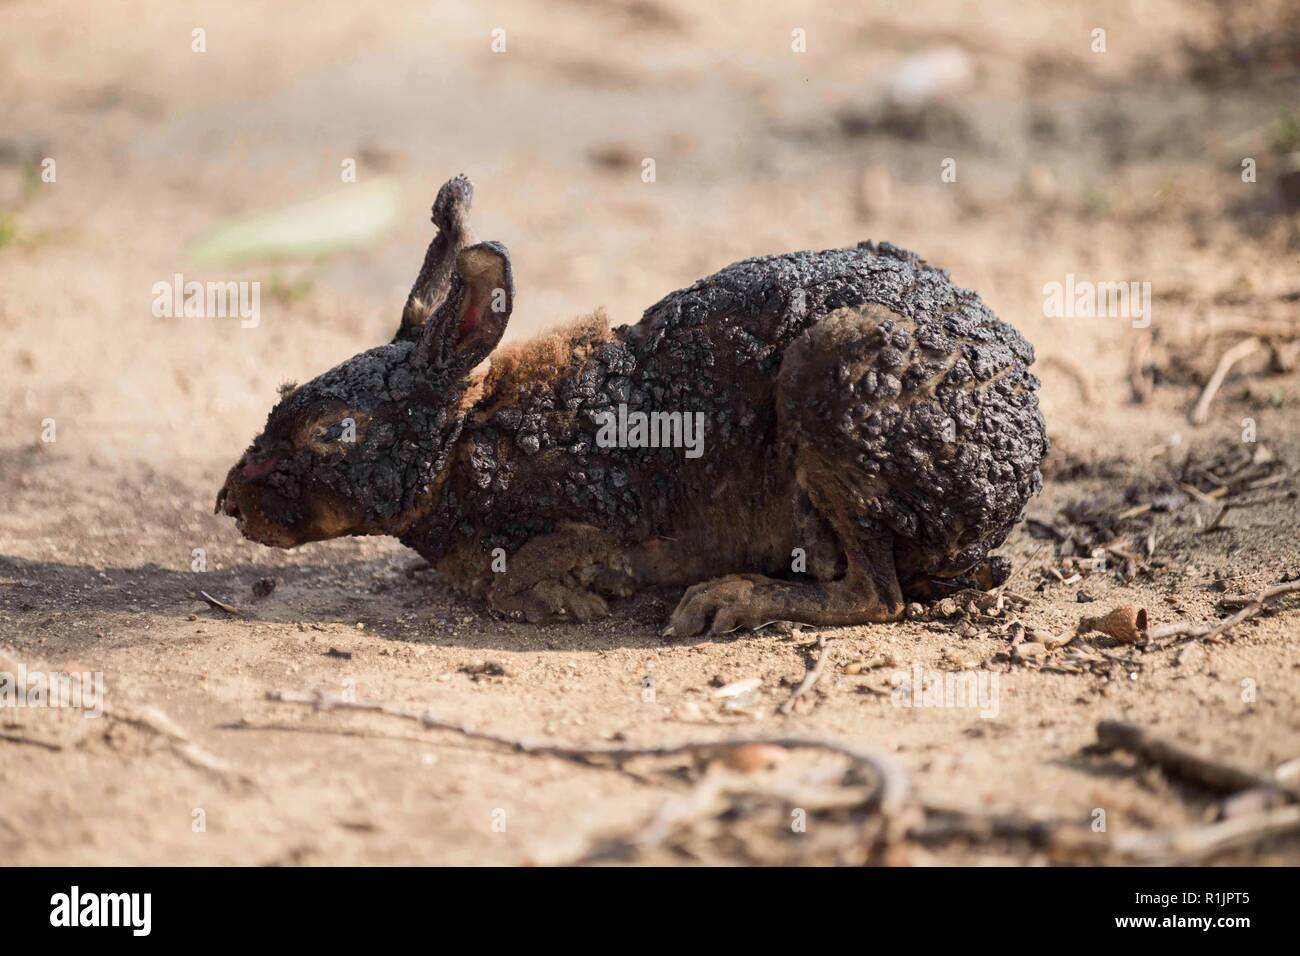 Malibu, California, USA. 12th Nov, 2018. A rabbit suffering from burns struggles to find safety, as the Woolsey Fire continues to burn. Credit: Chris Rusanowsky/ZUMA Wire/Alamy Live News Stock Photo